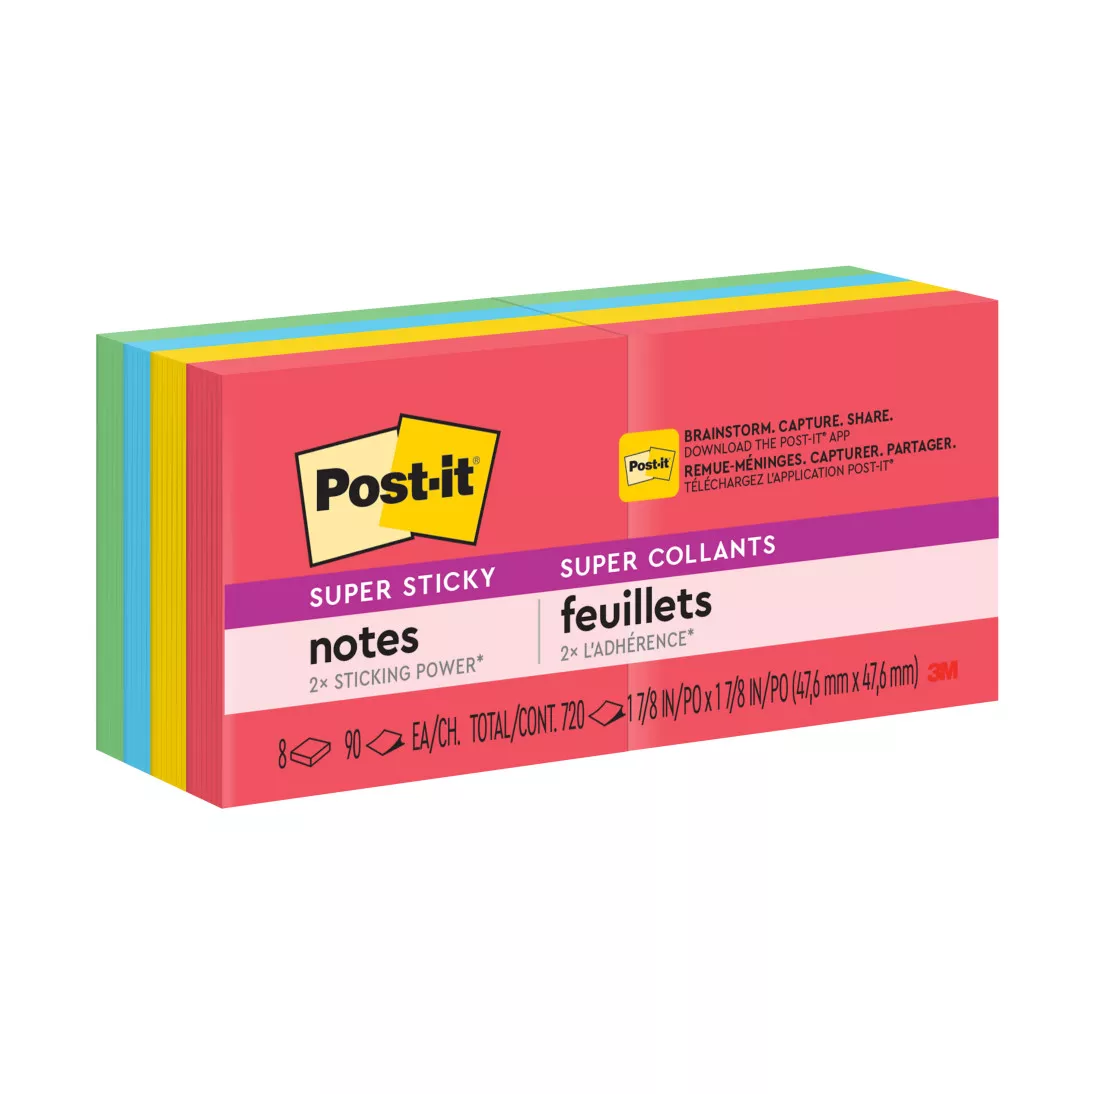 Post-it® Super Sticky Notes 622-8SSAN, 1.8 in x 1.8 in (47.6 mm x 47.6 mm) Marrakesh Colors